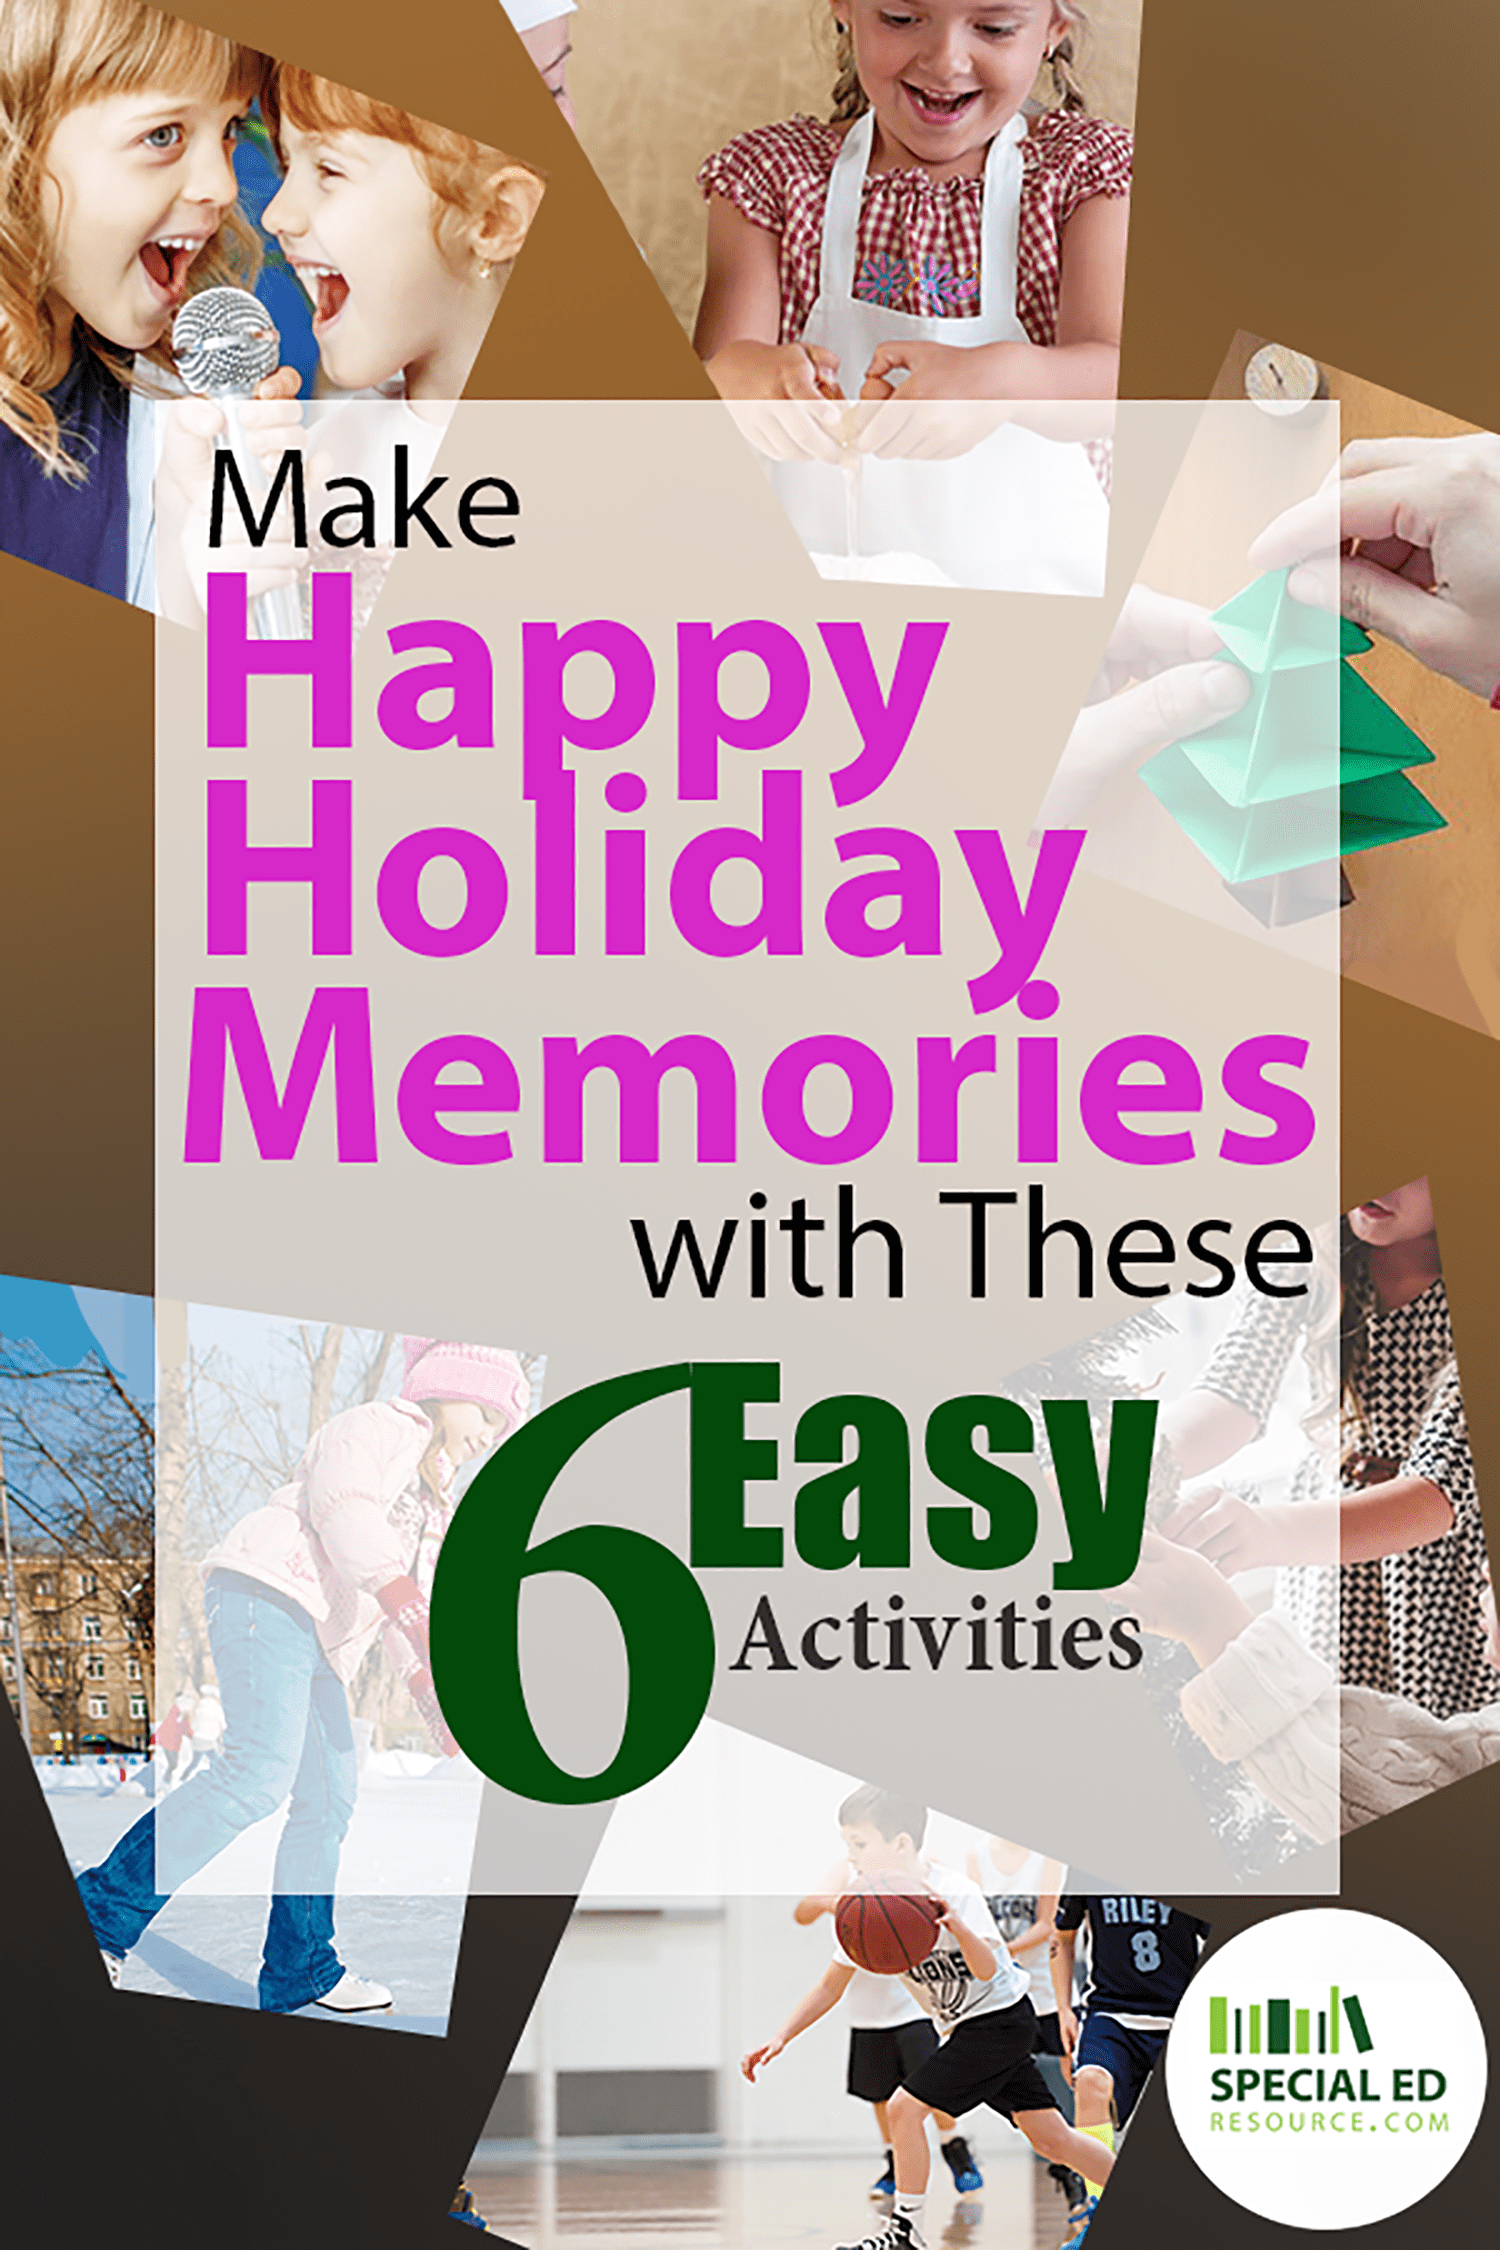 Make Happy Holiday Memories with These 6 Easy Activities